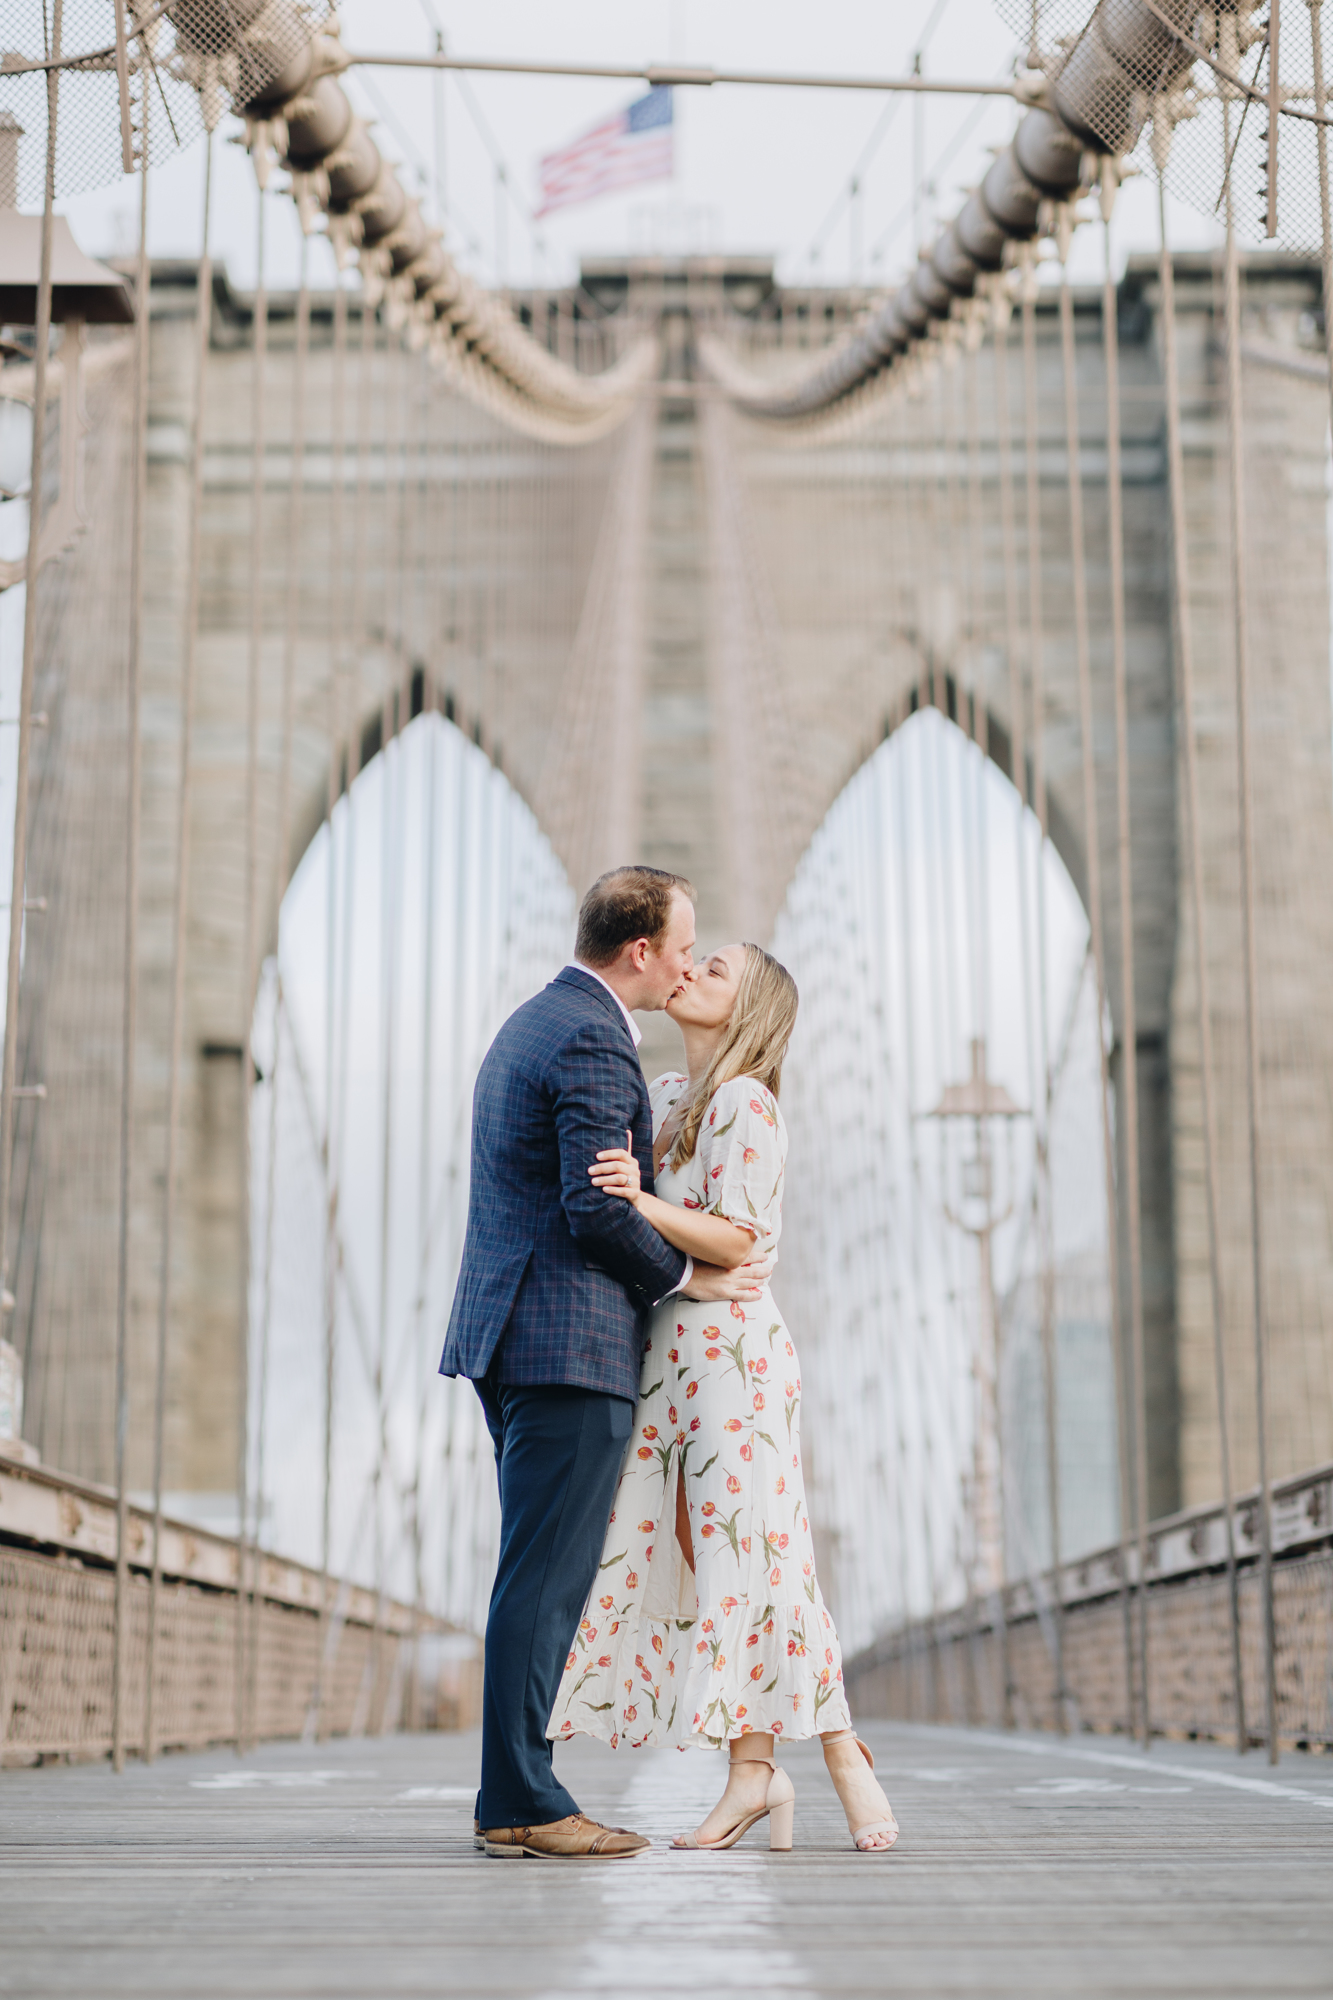 Figuring out how to hire a New York wedding photographer